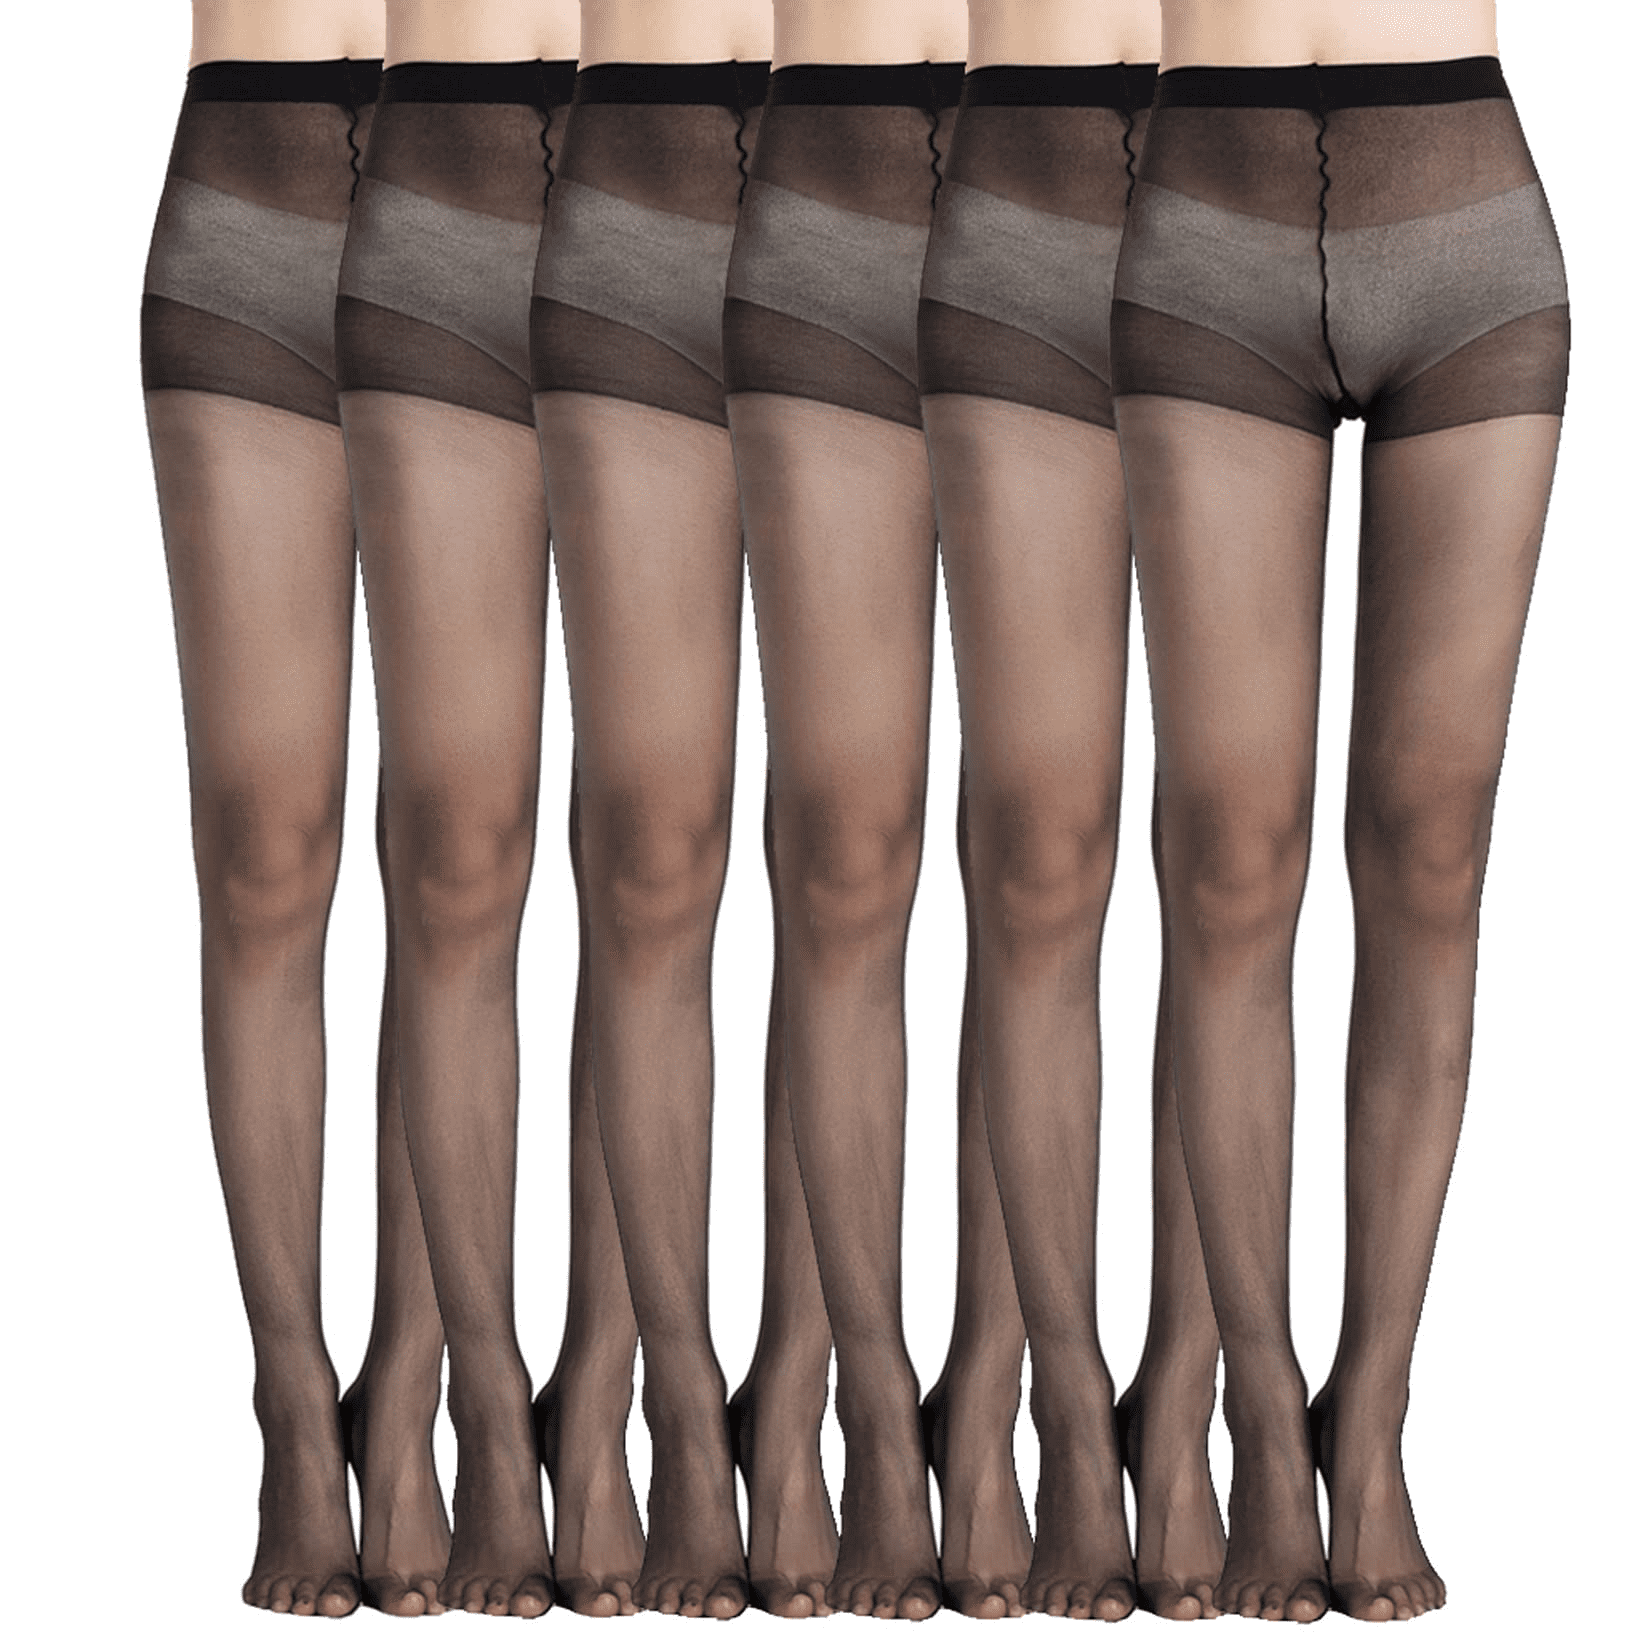 Yilanmy Women's Control Top Pantyhose Sheer Tights Tummy Control Support  Stockings 40 Denier Shaping Tights 2 Pairs(Black,S) at  Women's  Clothing store